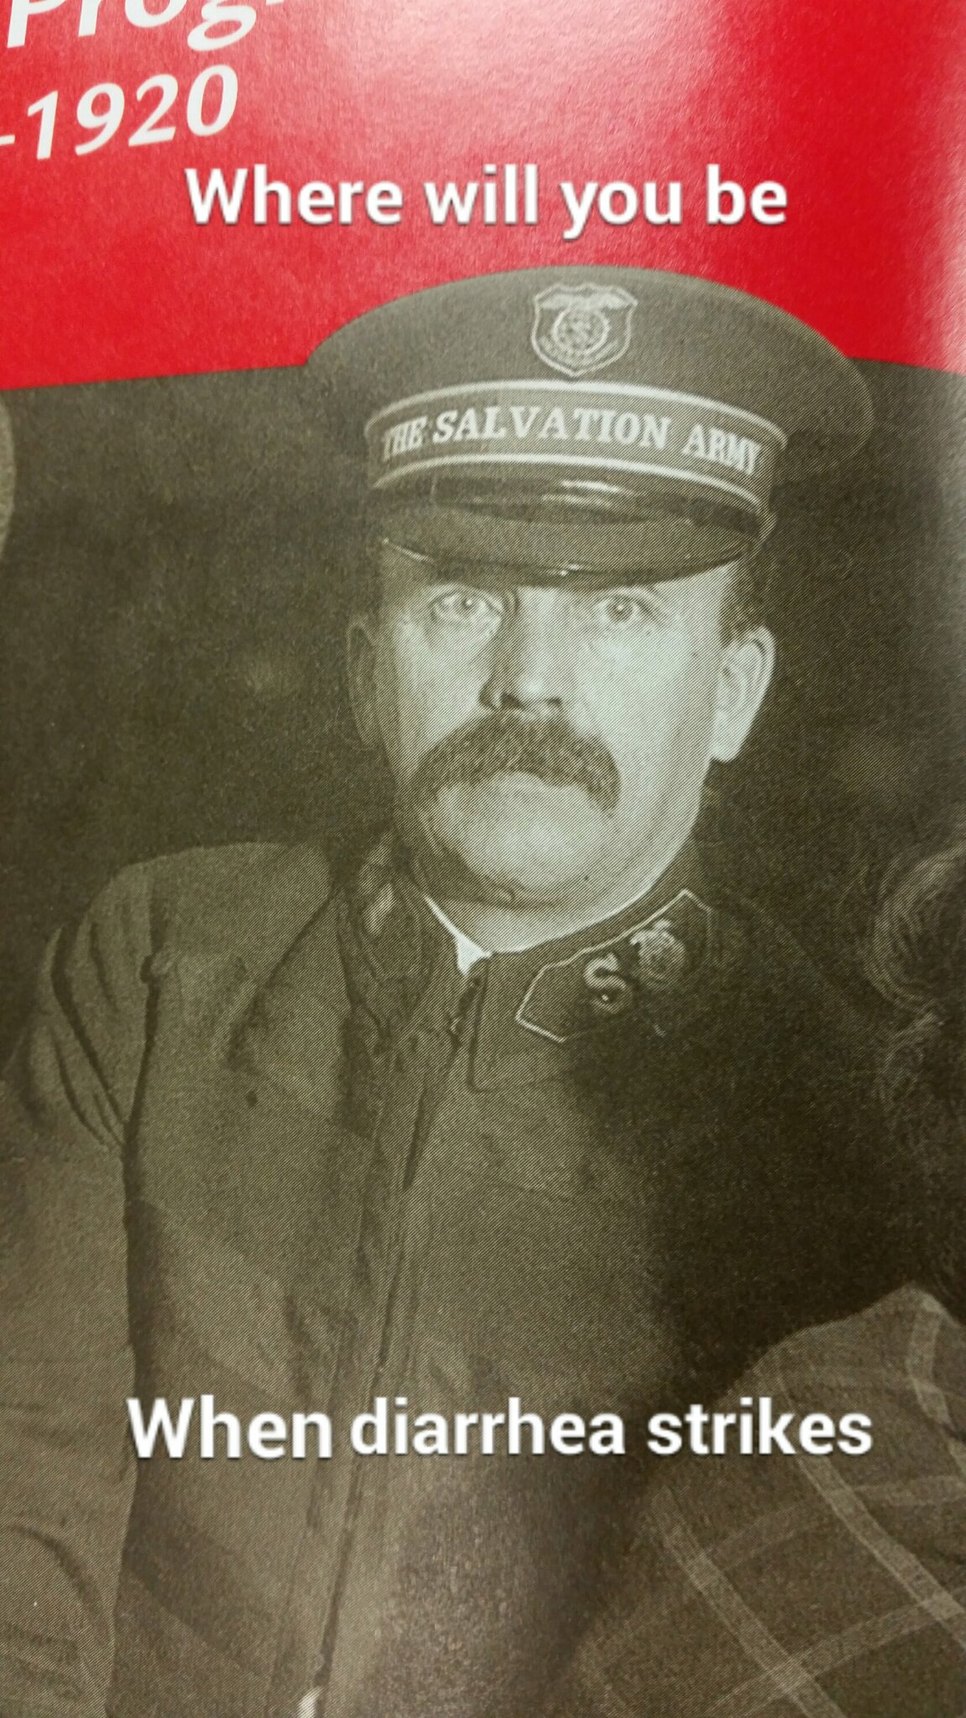 I found his face in my history book lol - meme